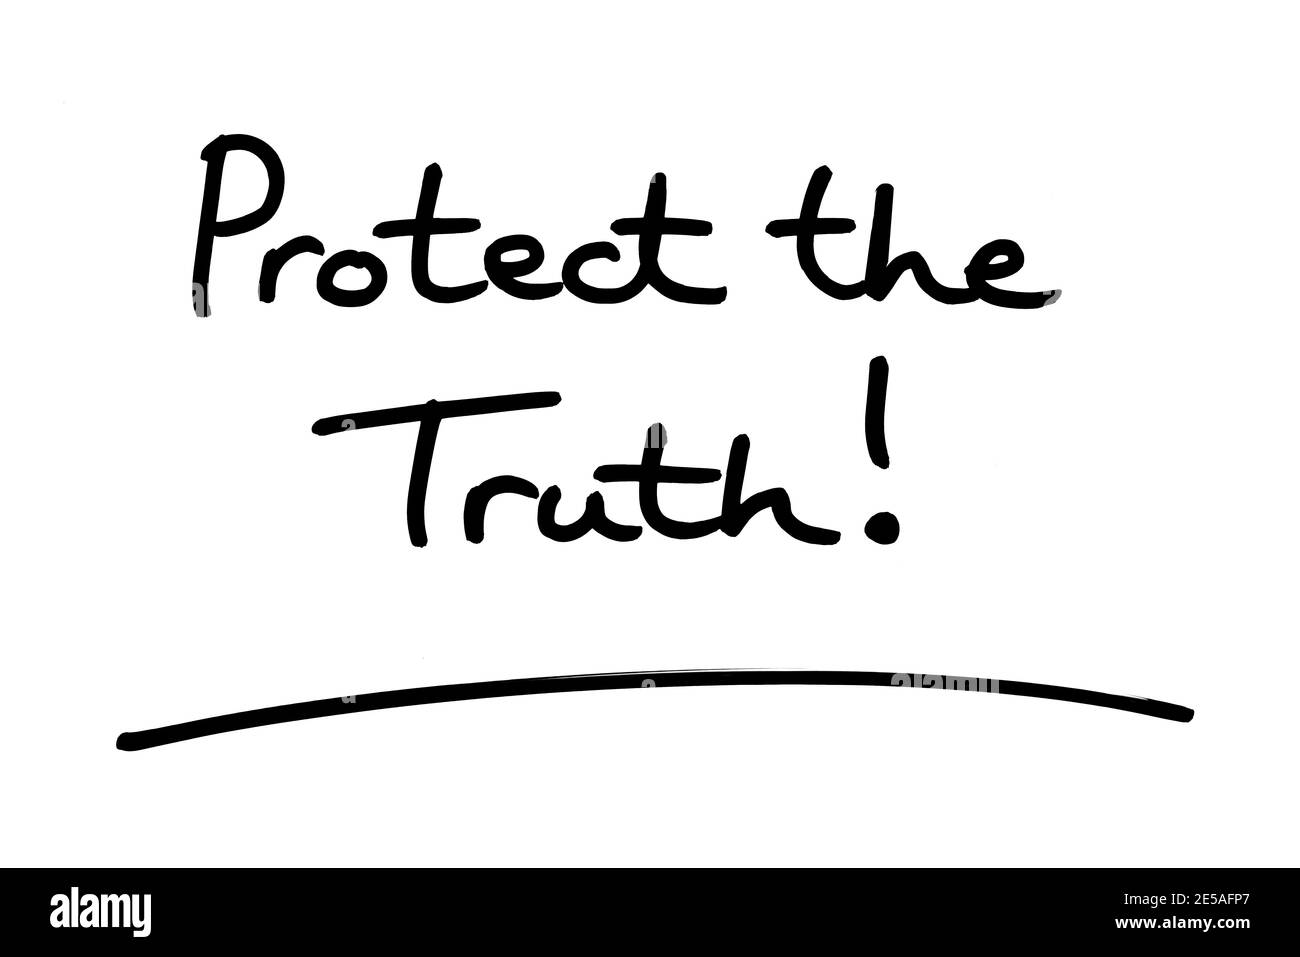 Protect the Truth! handwritten on a white background. Stock Photo